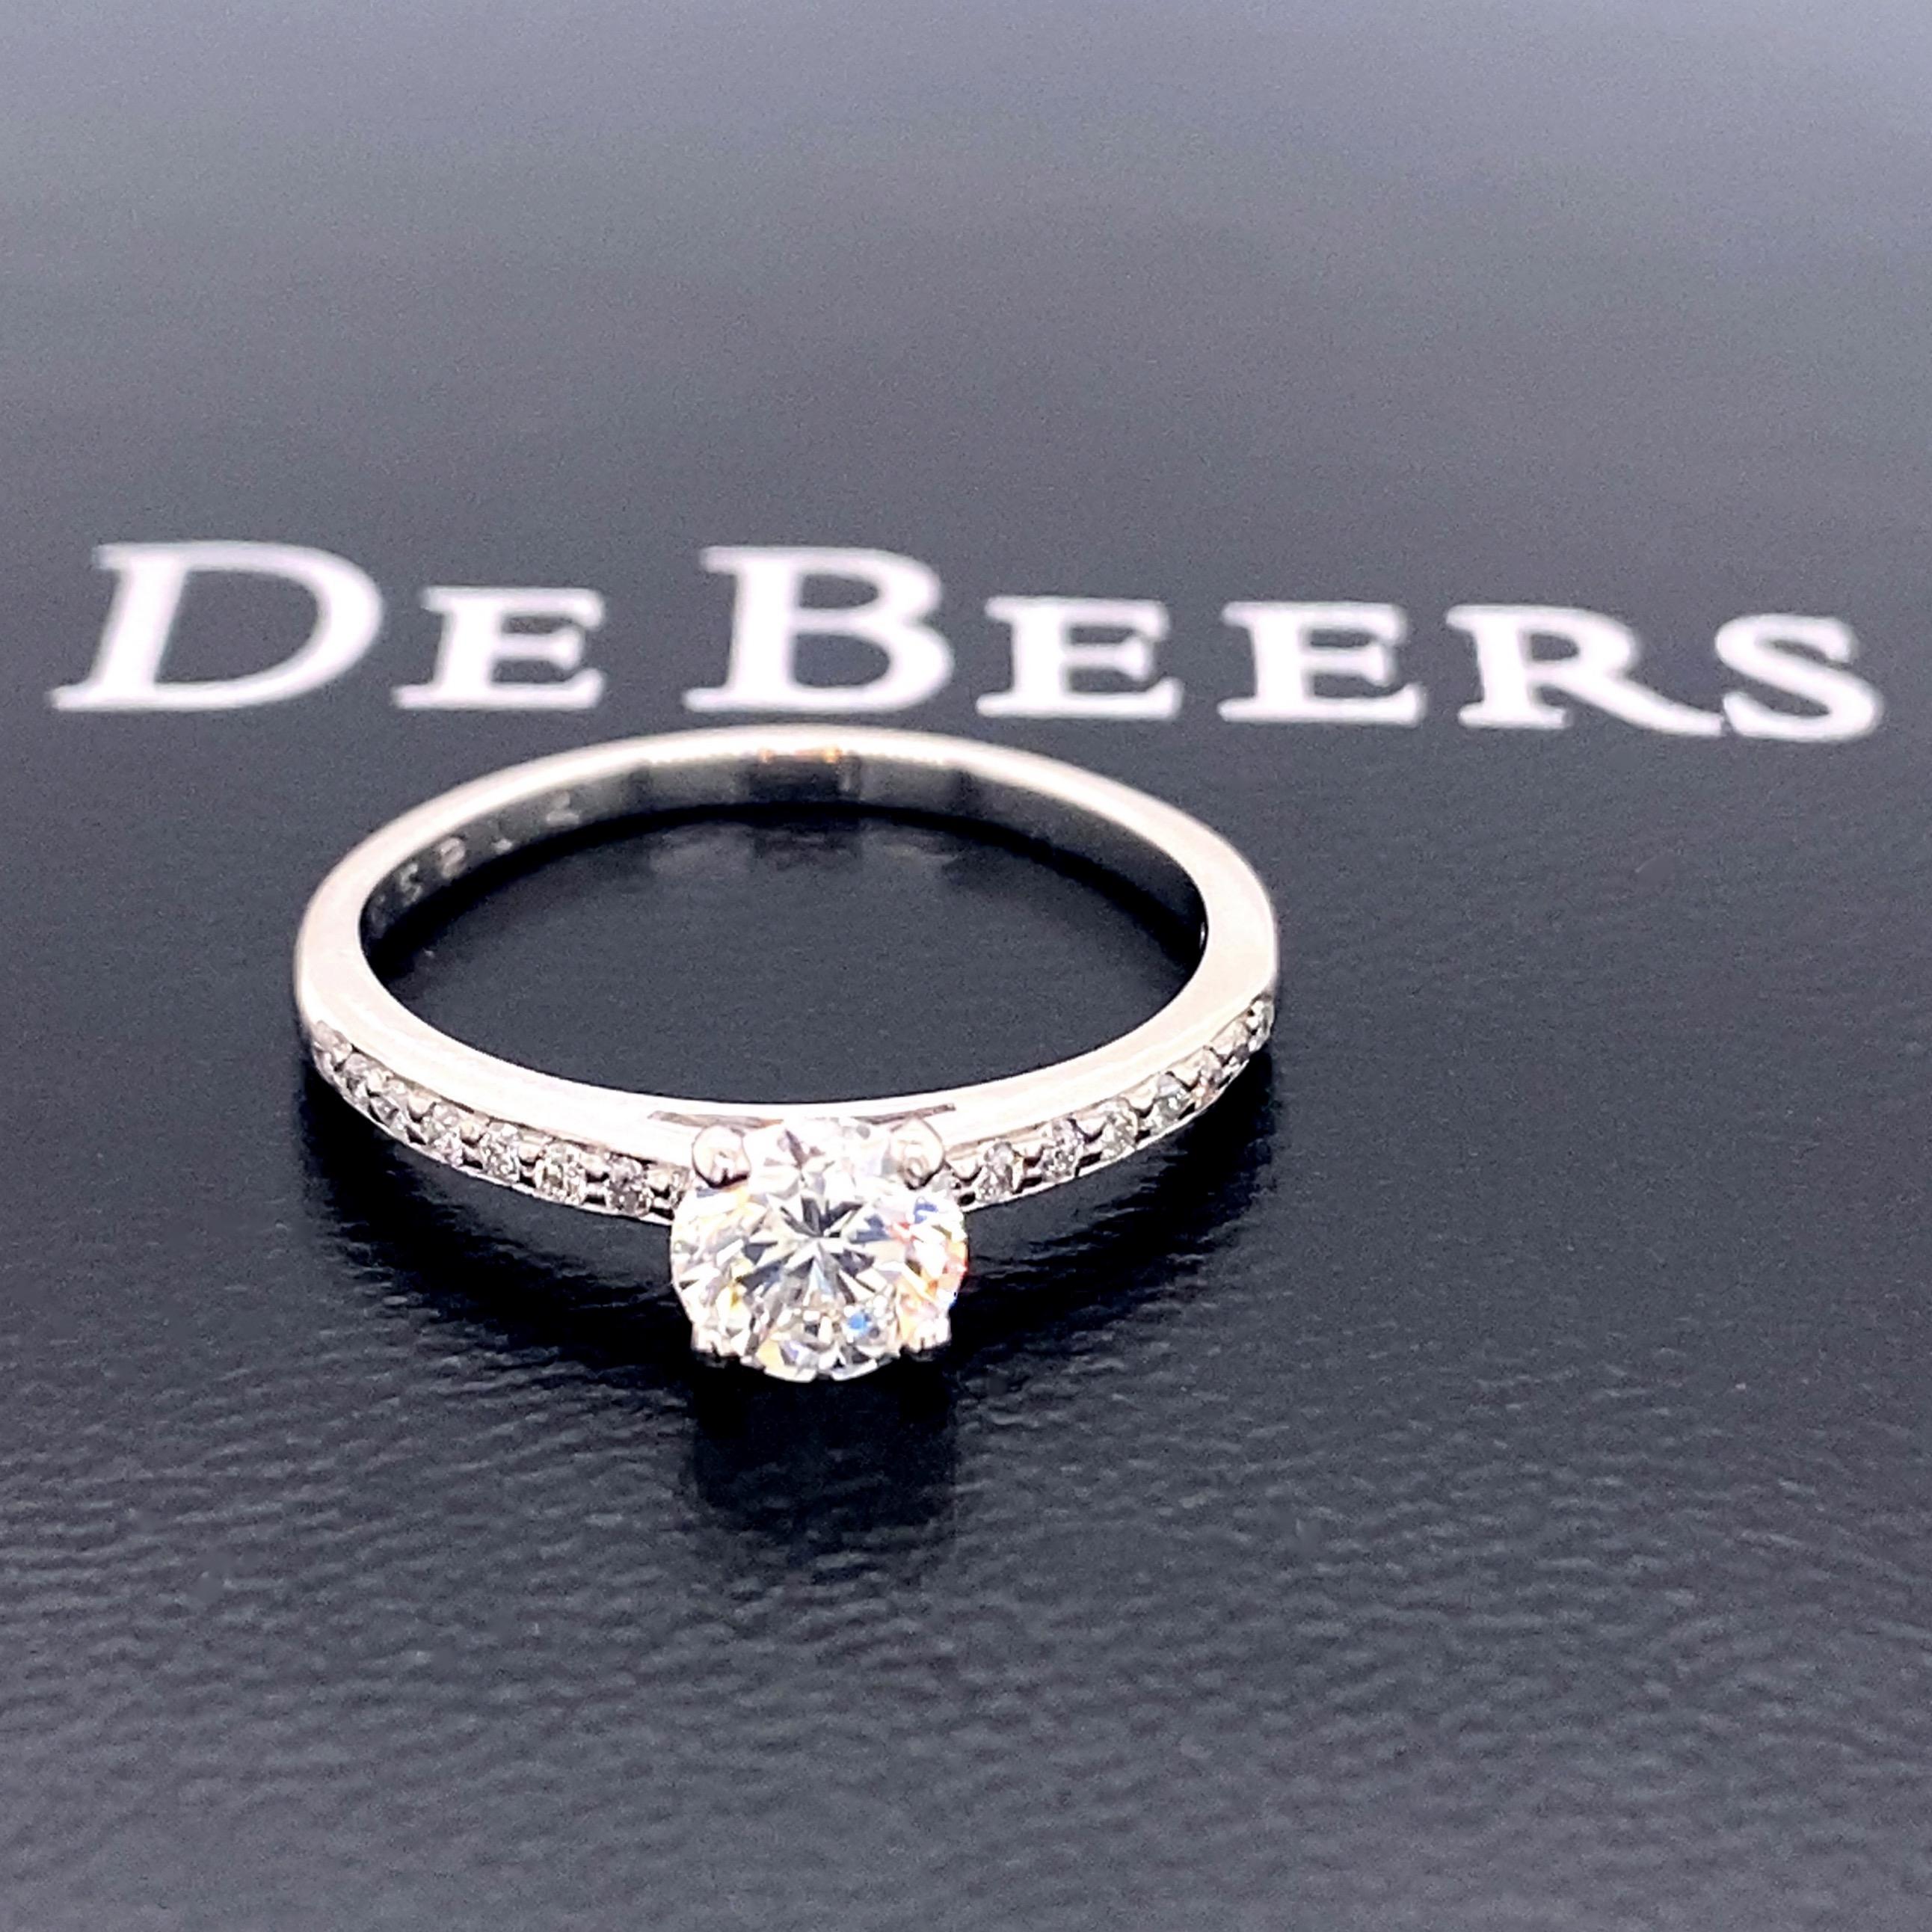 De Beers Forever Pave Diamond Engagement Ring 
Ref. number:  A55214
Metal:  Platinum PT950
Size: 6 sizable
TCW:  0.68 tcw
Main Diamond:  Round Brilliant 0.56 ct
Color & Clarity:  G, VS1
Accent Diamonds:   16 Round Brilliant Diamonds 0.12 TCW
Color &